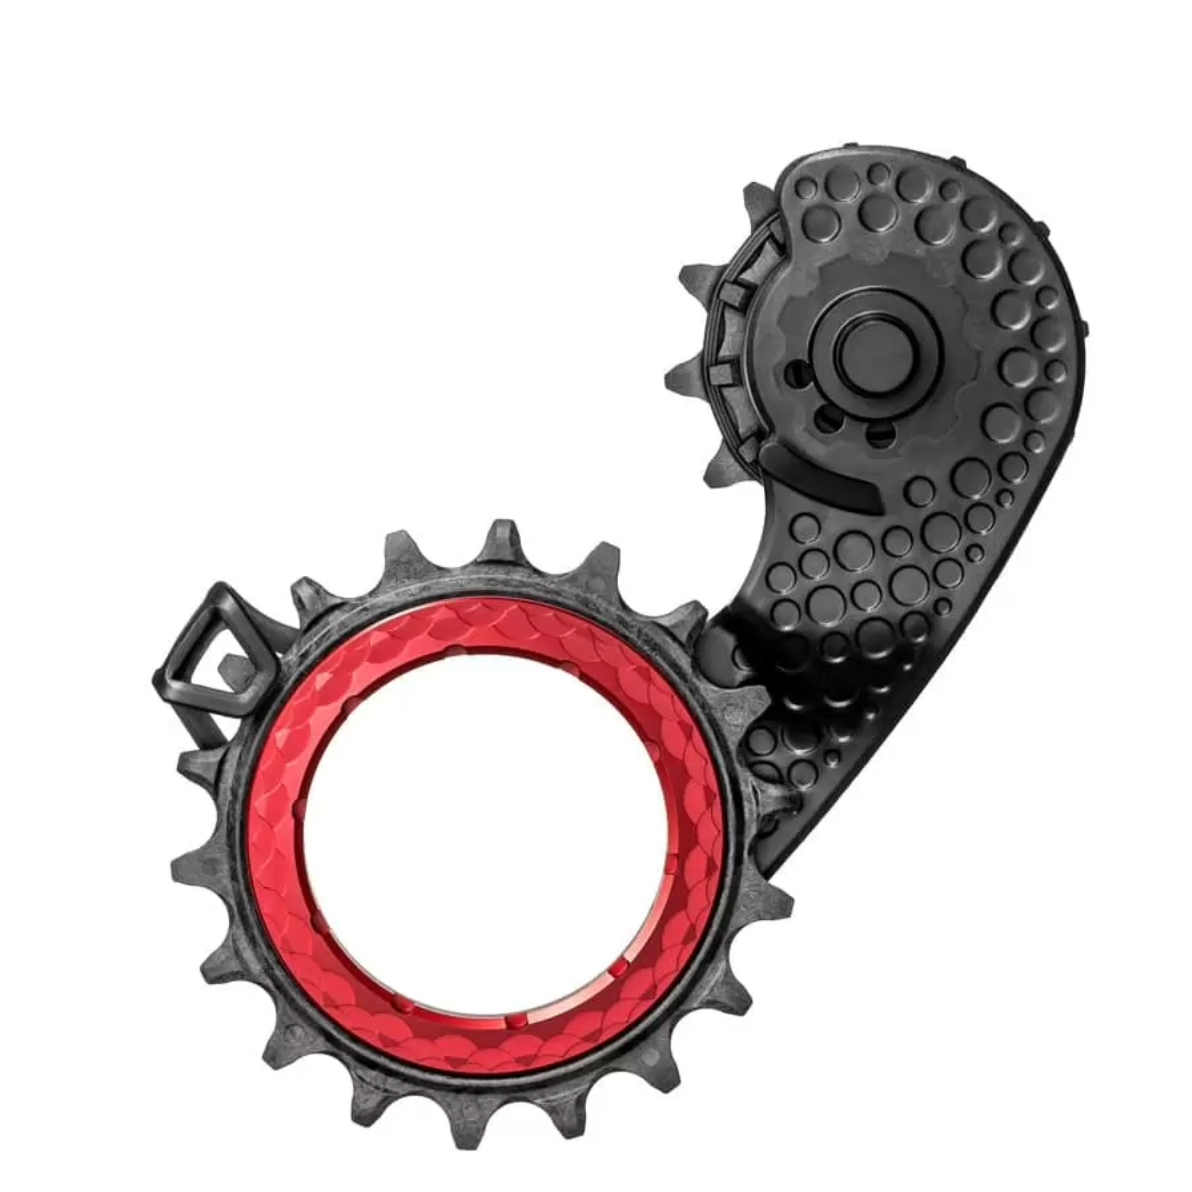 Absolute Black Carbon-Ceramic Hollow Cage, Shimano - Red 